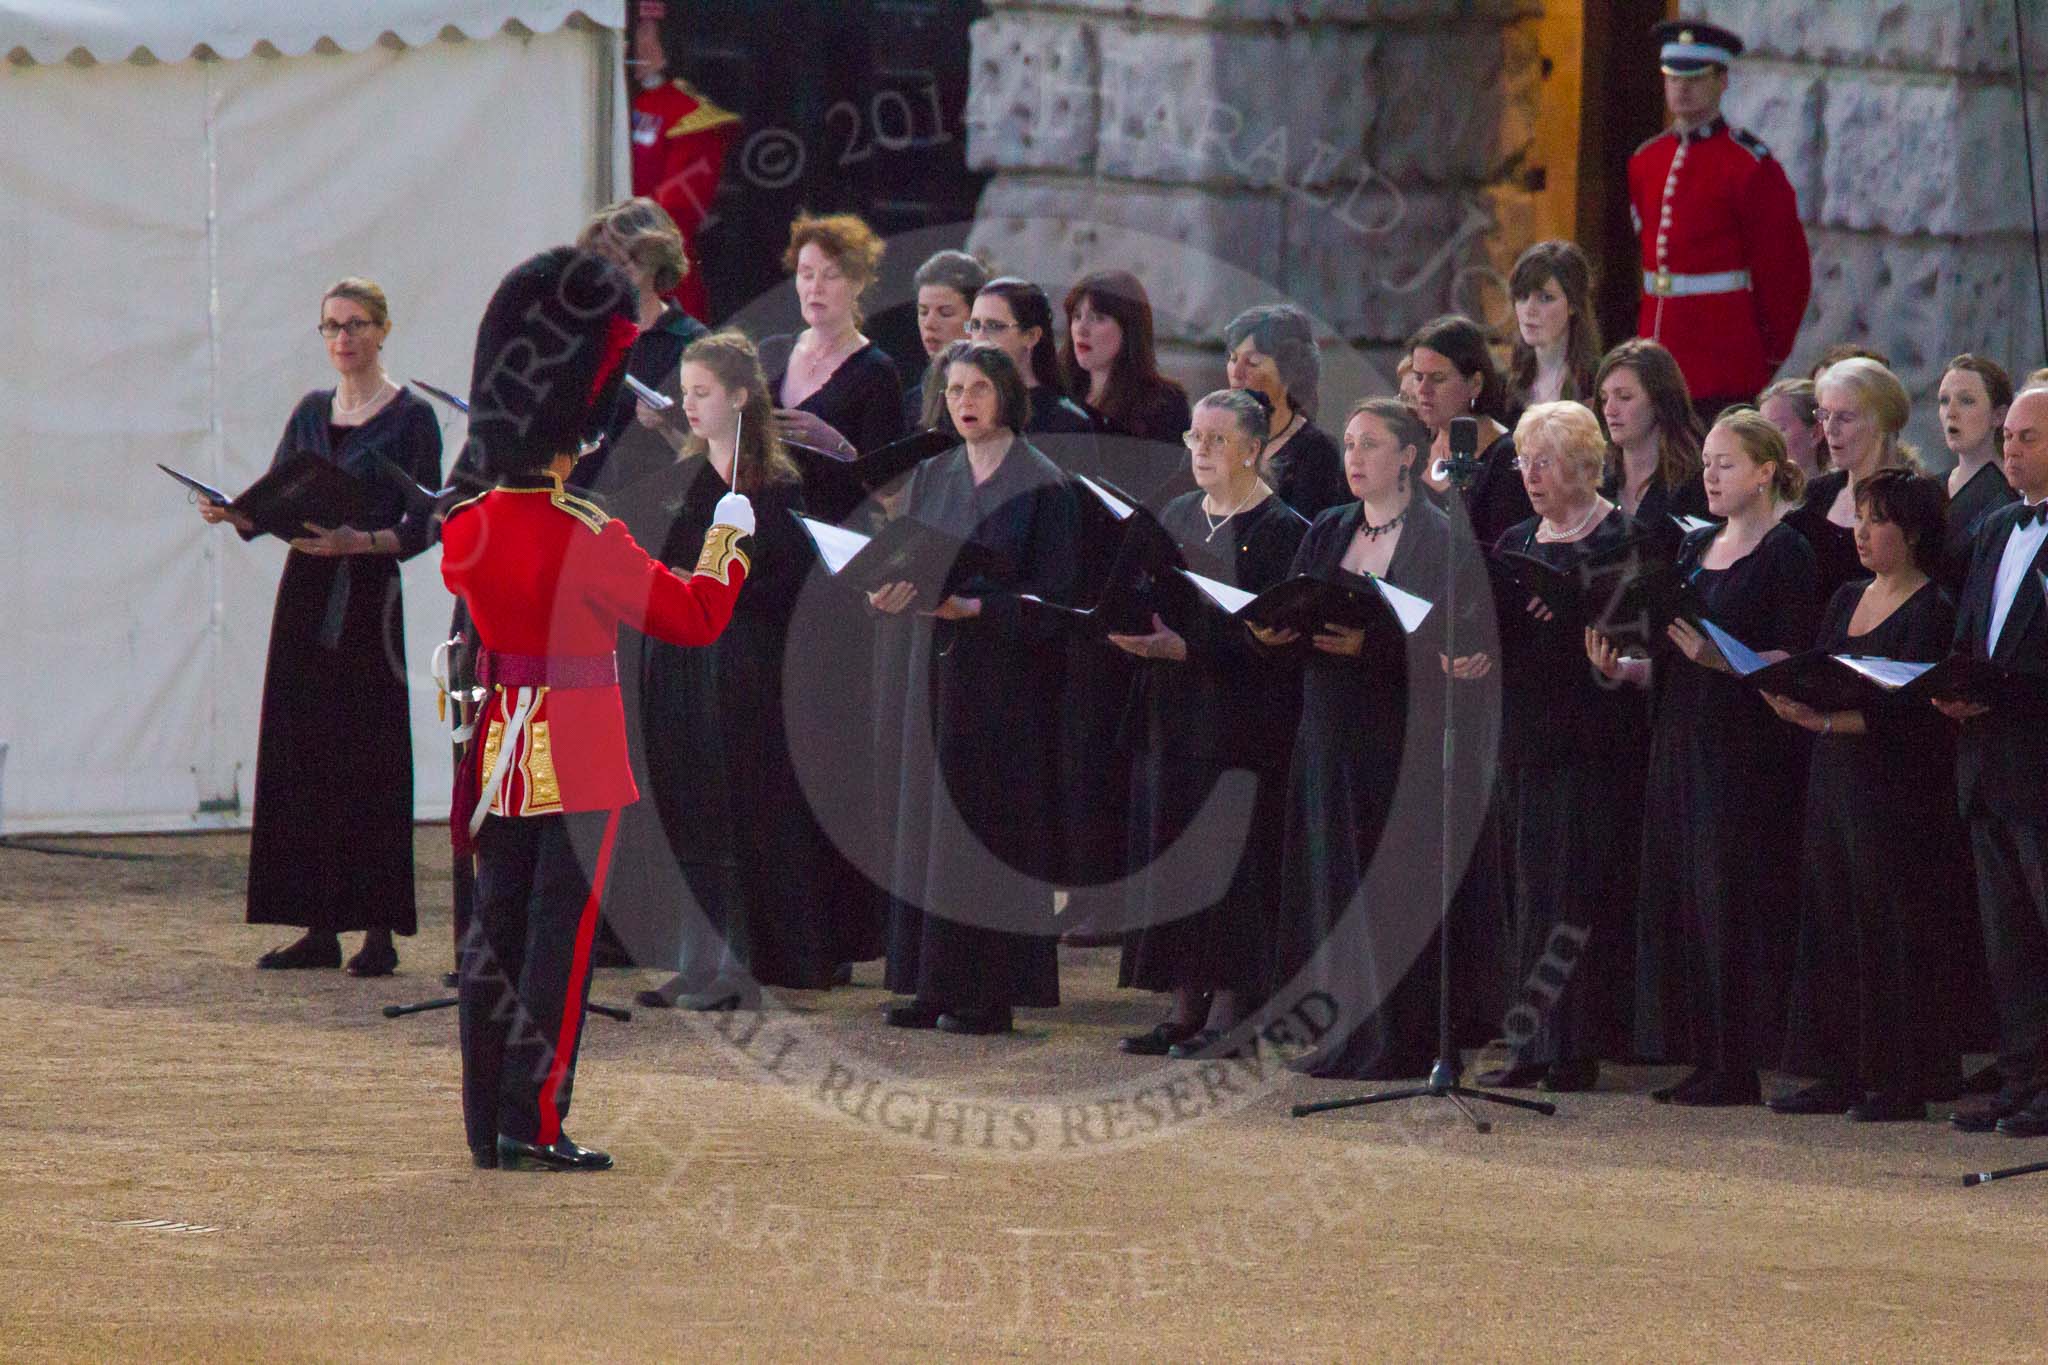 Beating Retreat 2014.
Horse Guards Parade, Westminster,
London SW1A,

United Kingdom,
on 11 June 2014 at 21:28, image #337